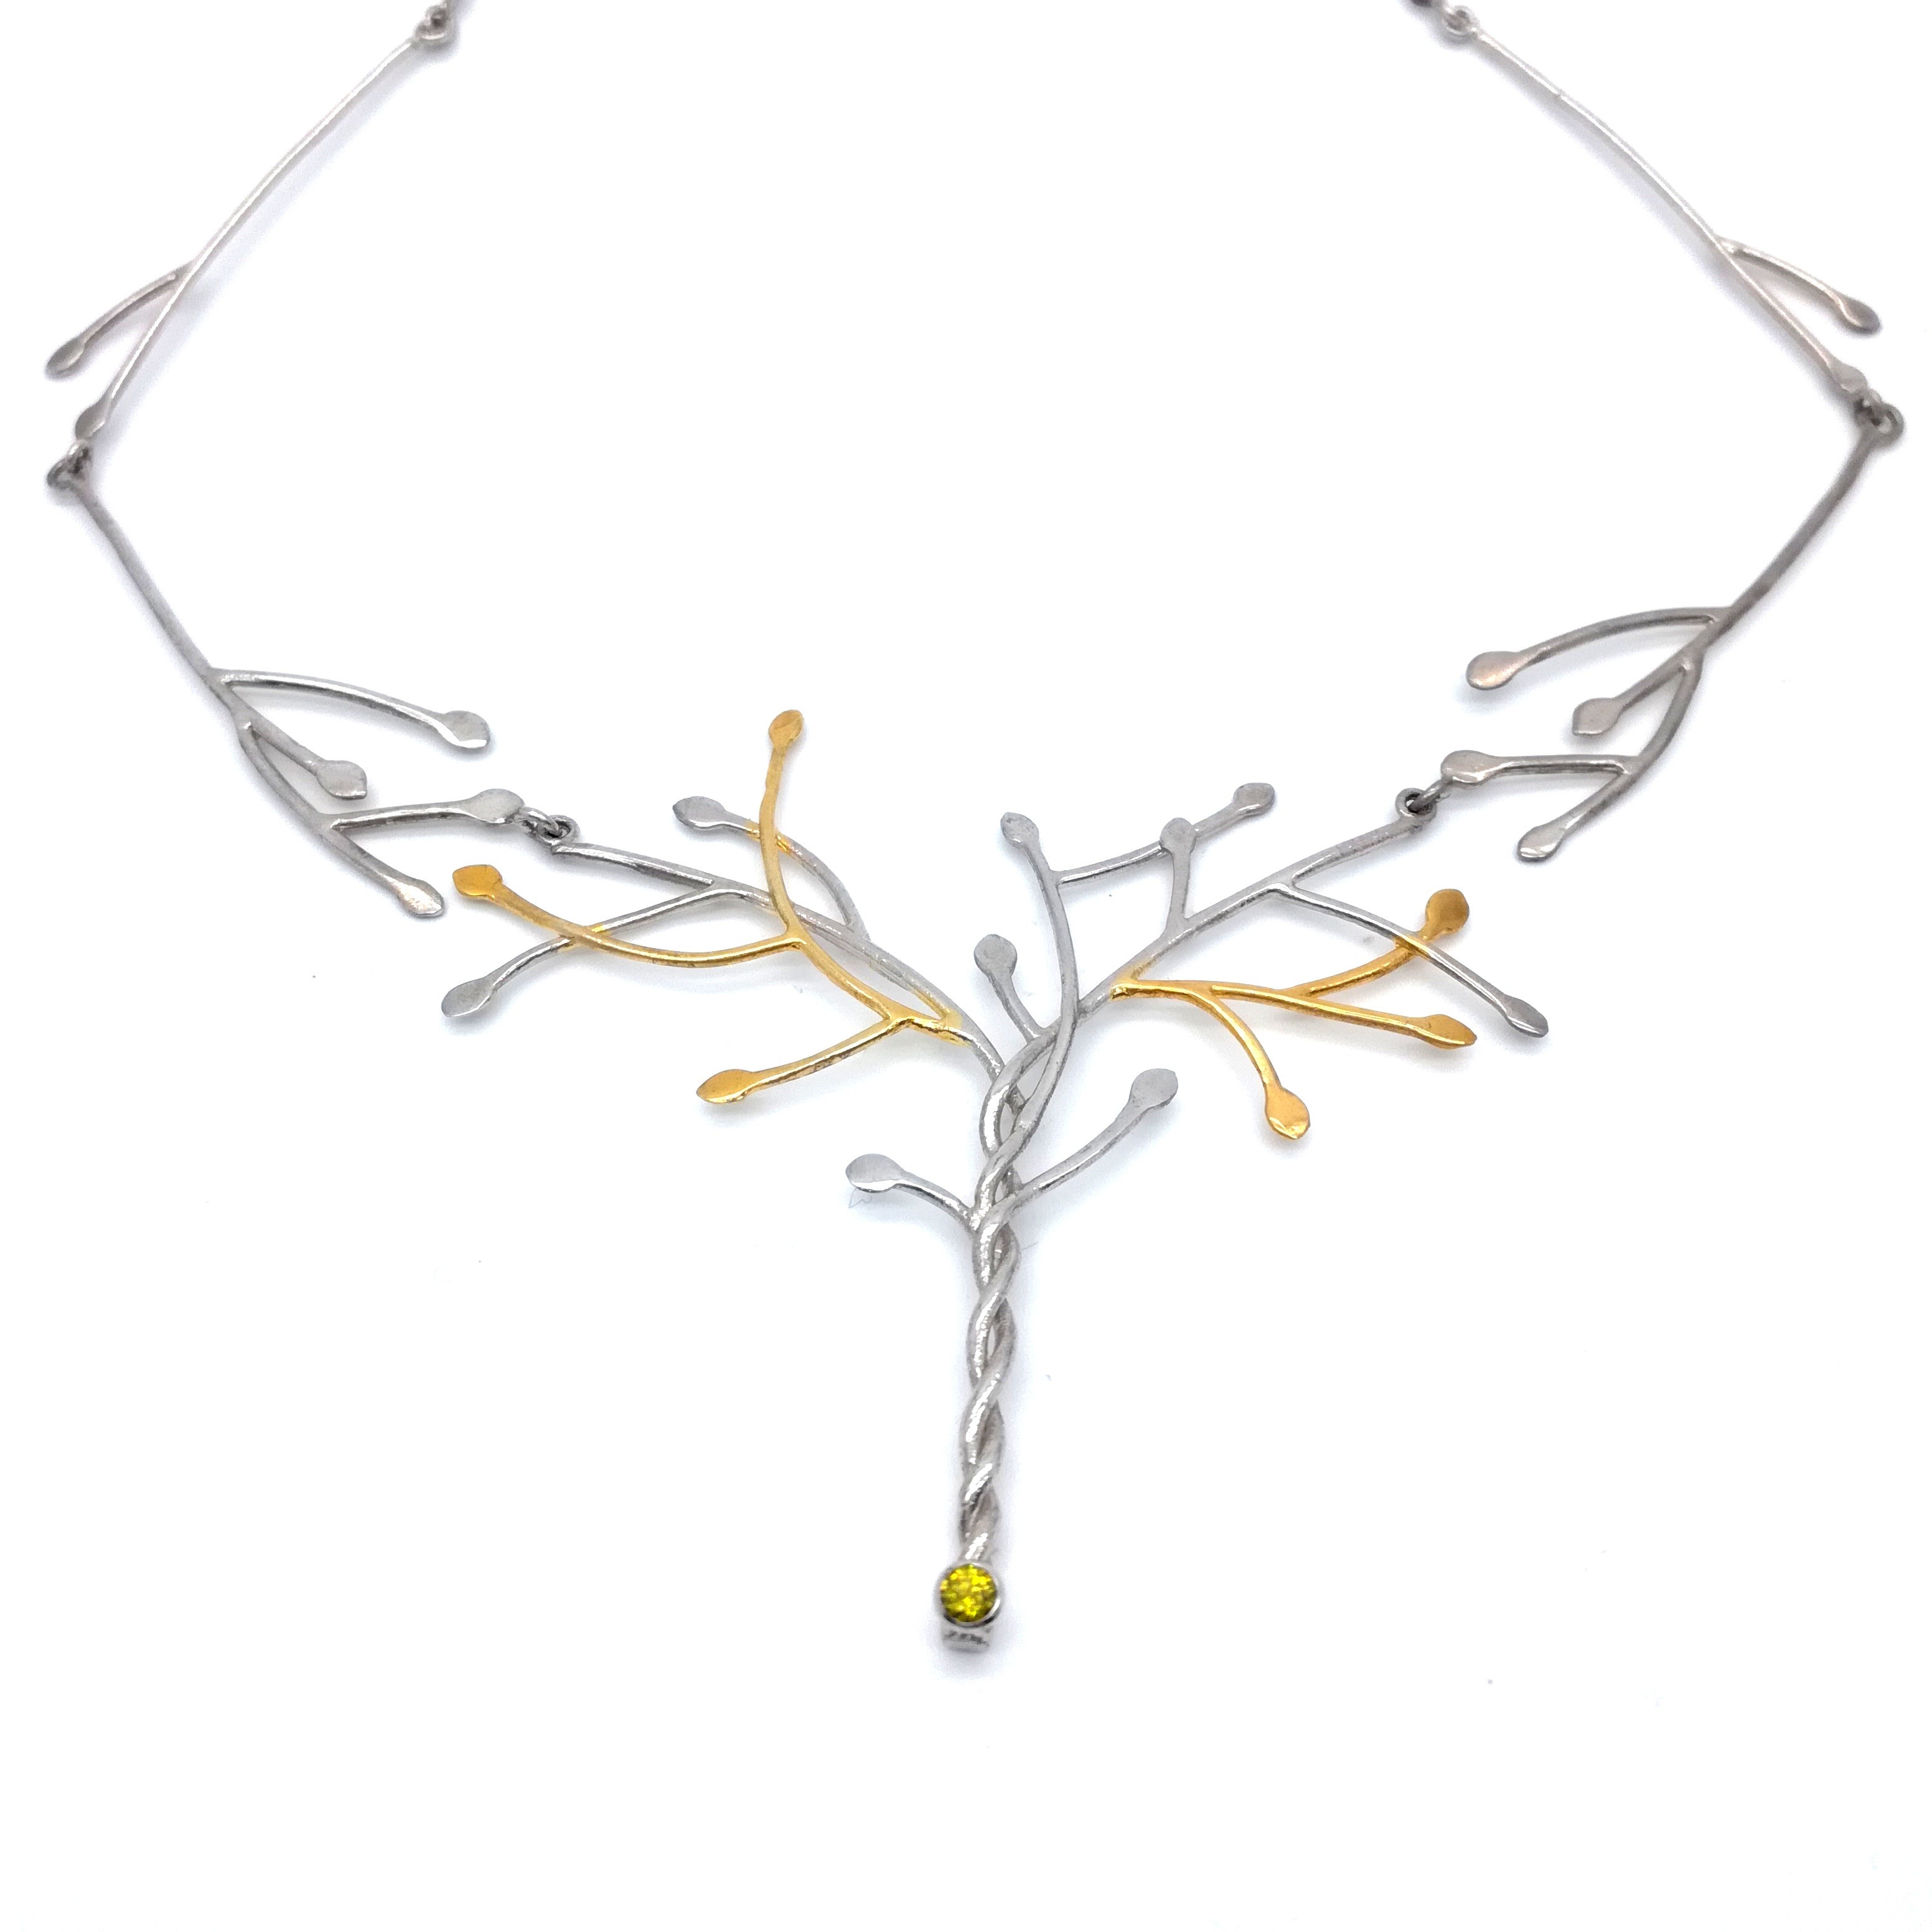 Silver necklace 925 rhodium and gold plated with synthetic stones